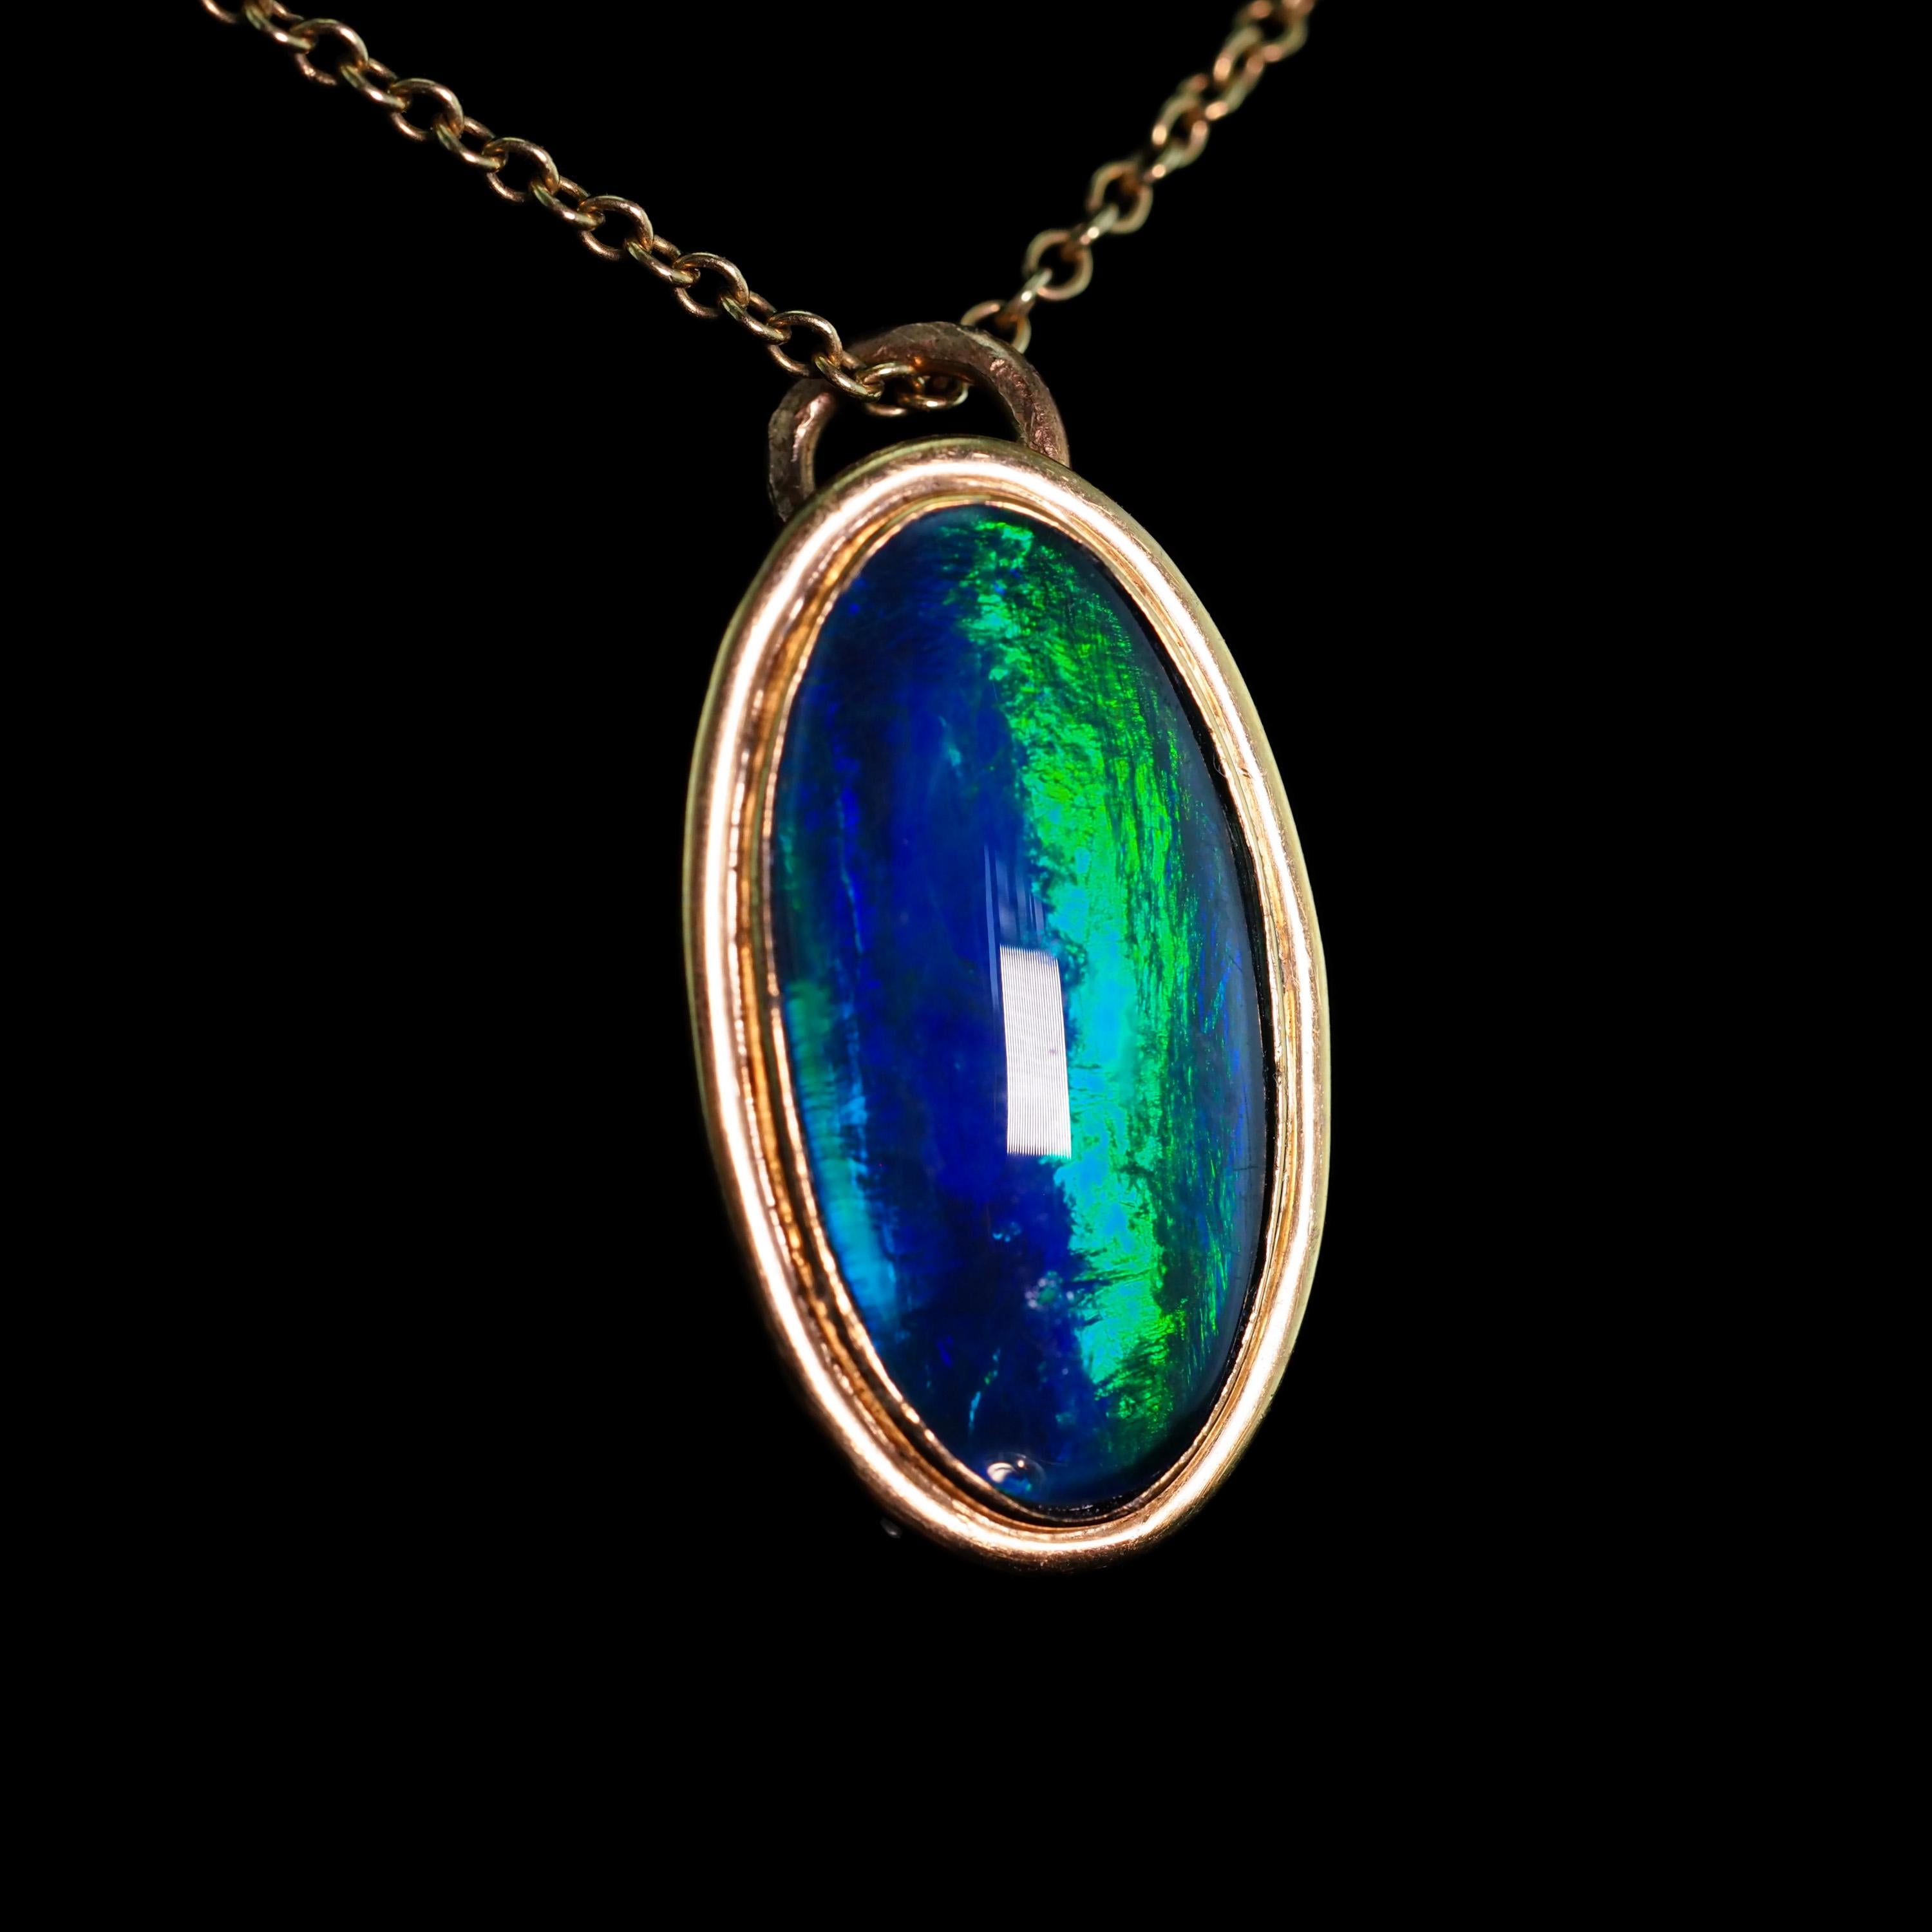 9K Gold Blue/Green Ammolite Pendant & Chain Necklace For Sale 3